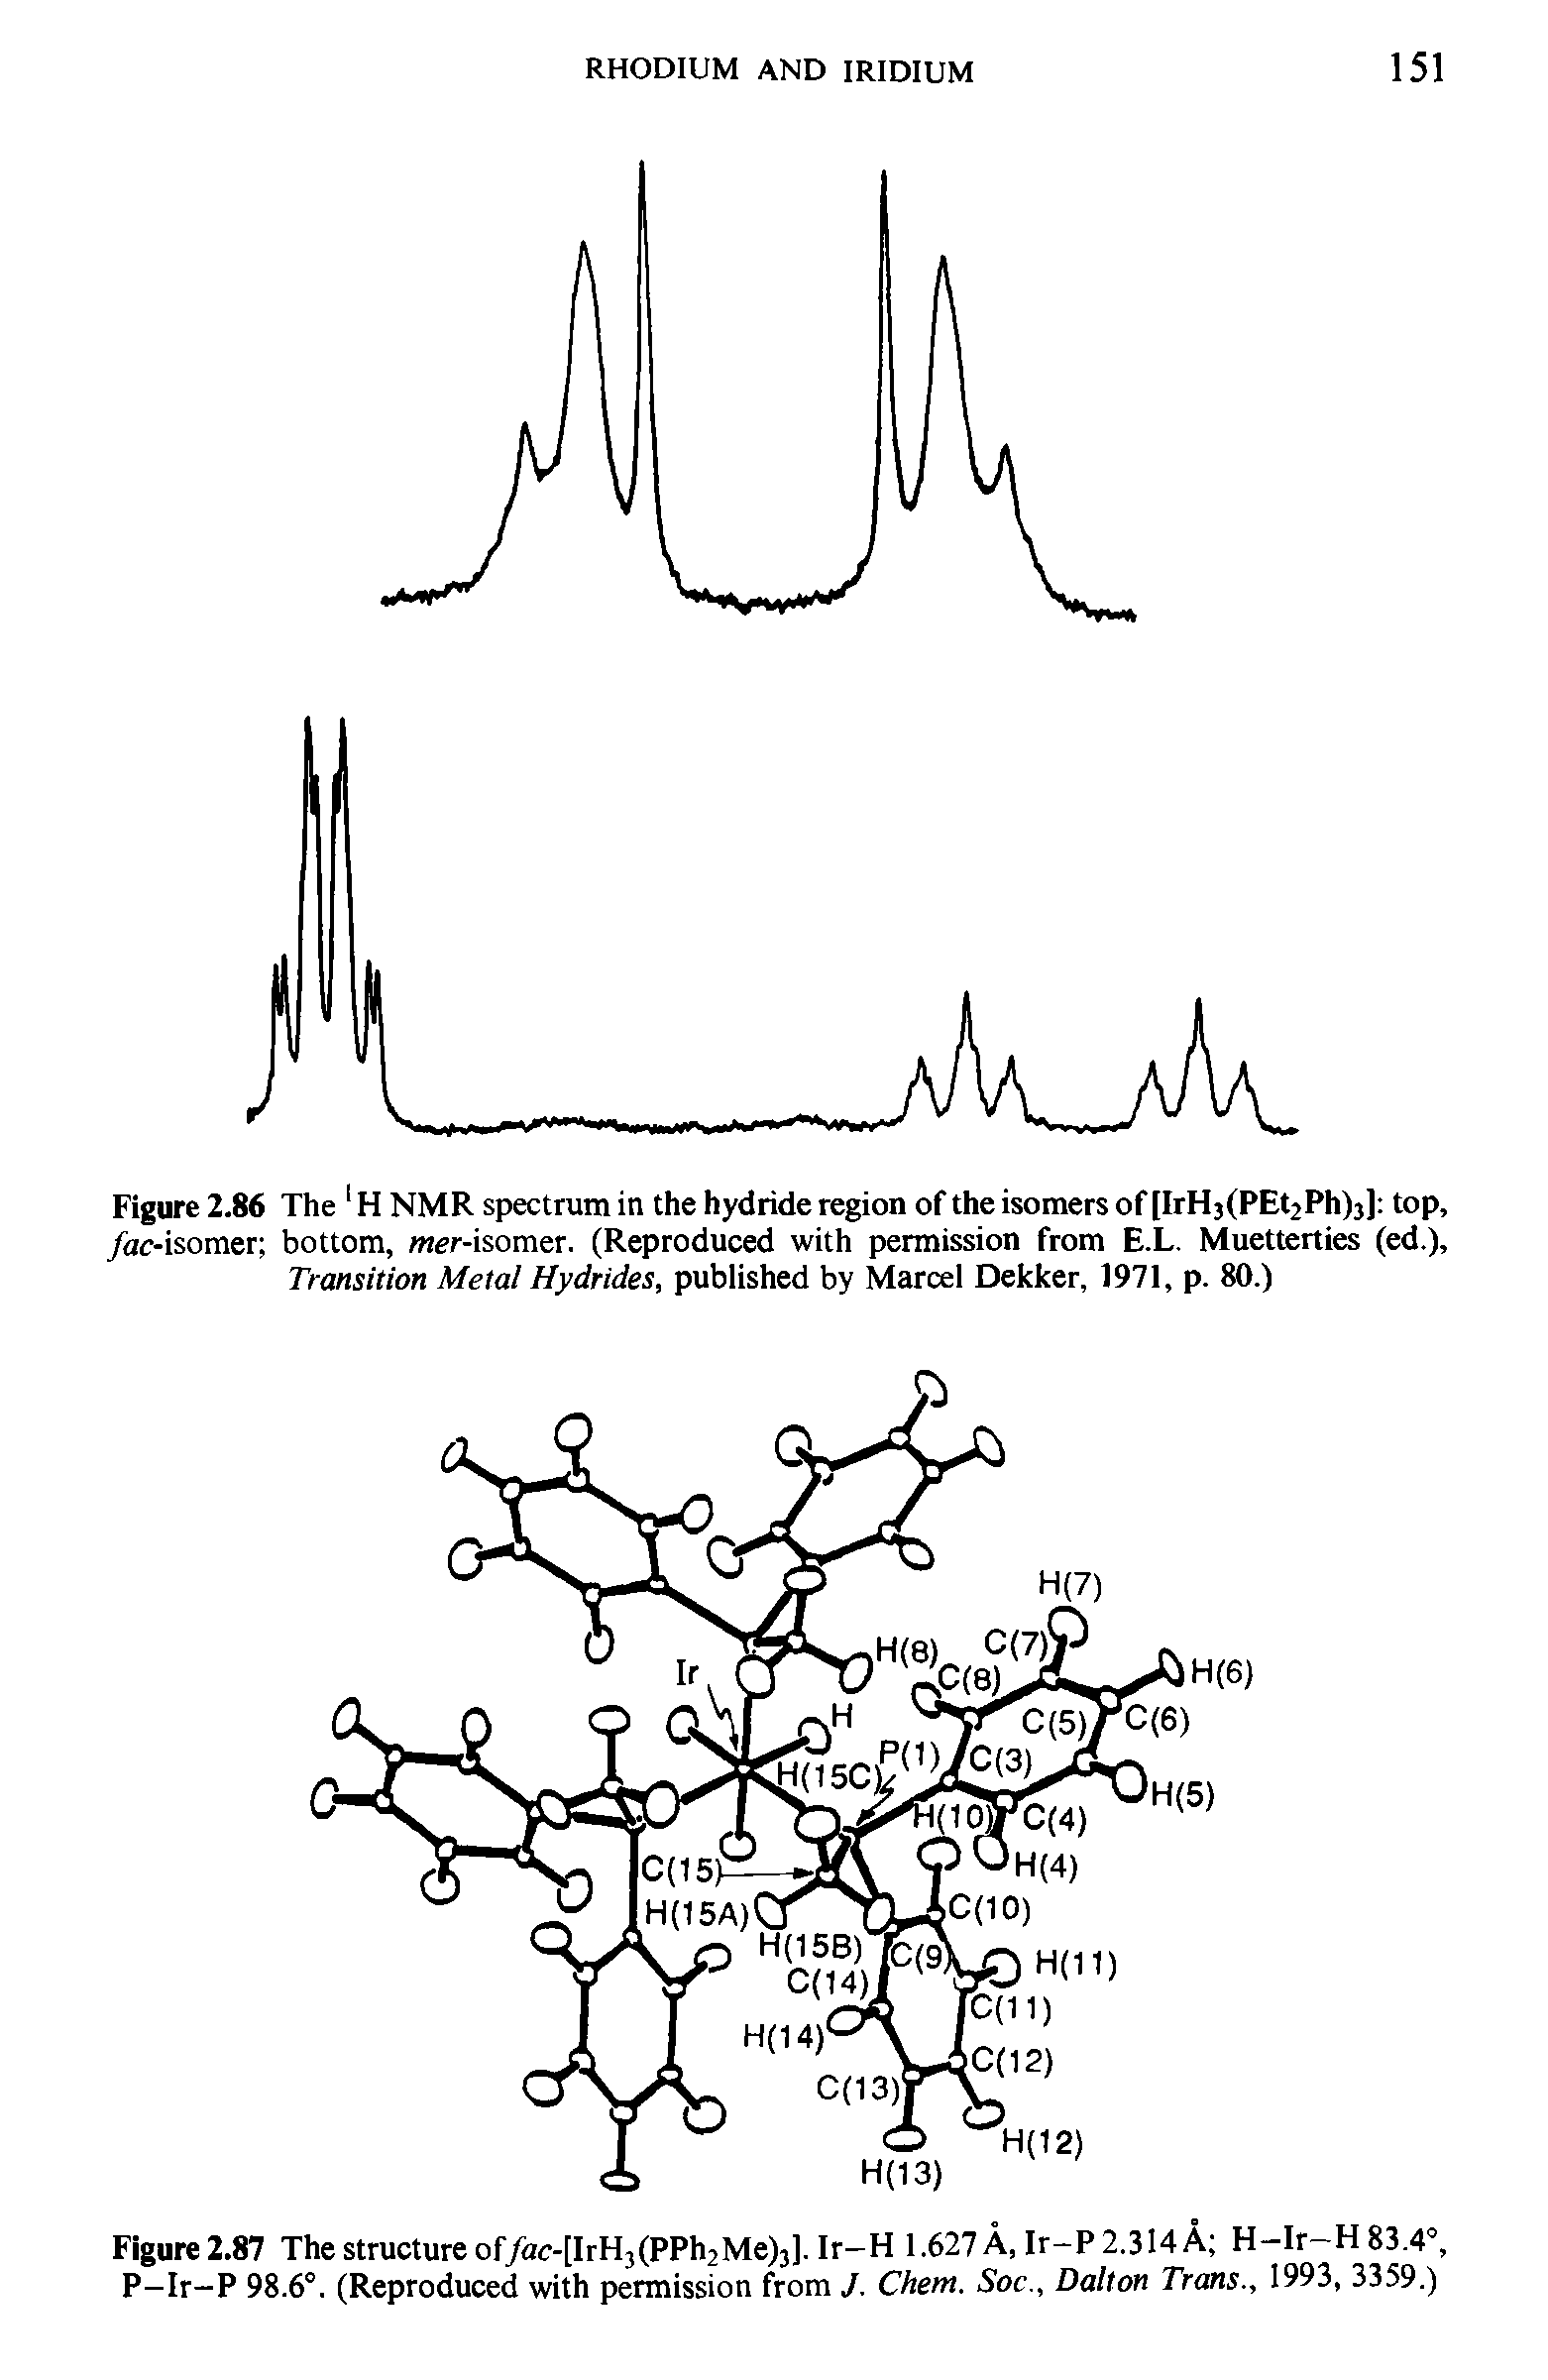 Figure 2.86 The 1H NMR spectrum in the hydride region of the isomers of [IrH3(PEt2Ph)j] top, /ac-isomer bottom, mer-isomer. (Reproduced with permission from E.L. Muetterties (ed.), Transition Metal Hydrides, published by Marcel Dekker, 1971, p. 80.)...